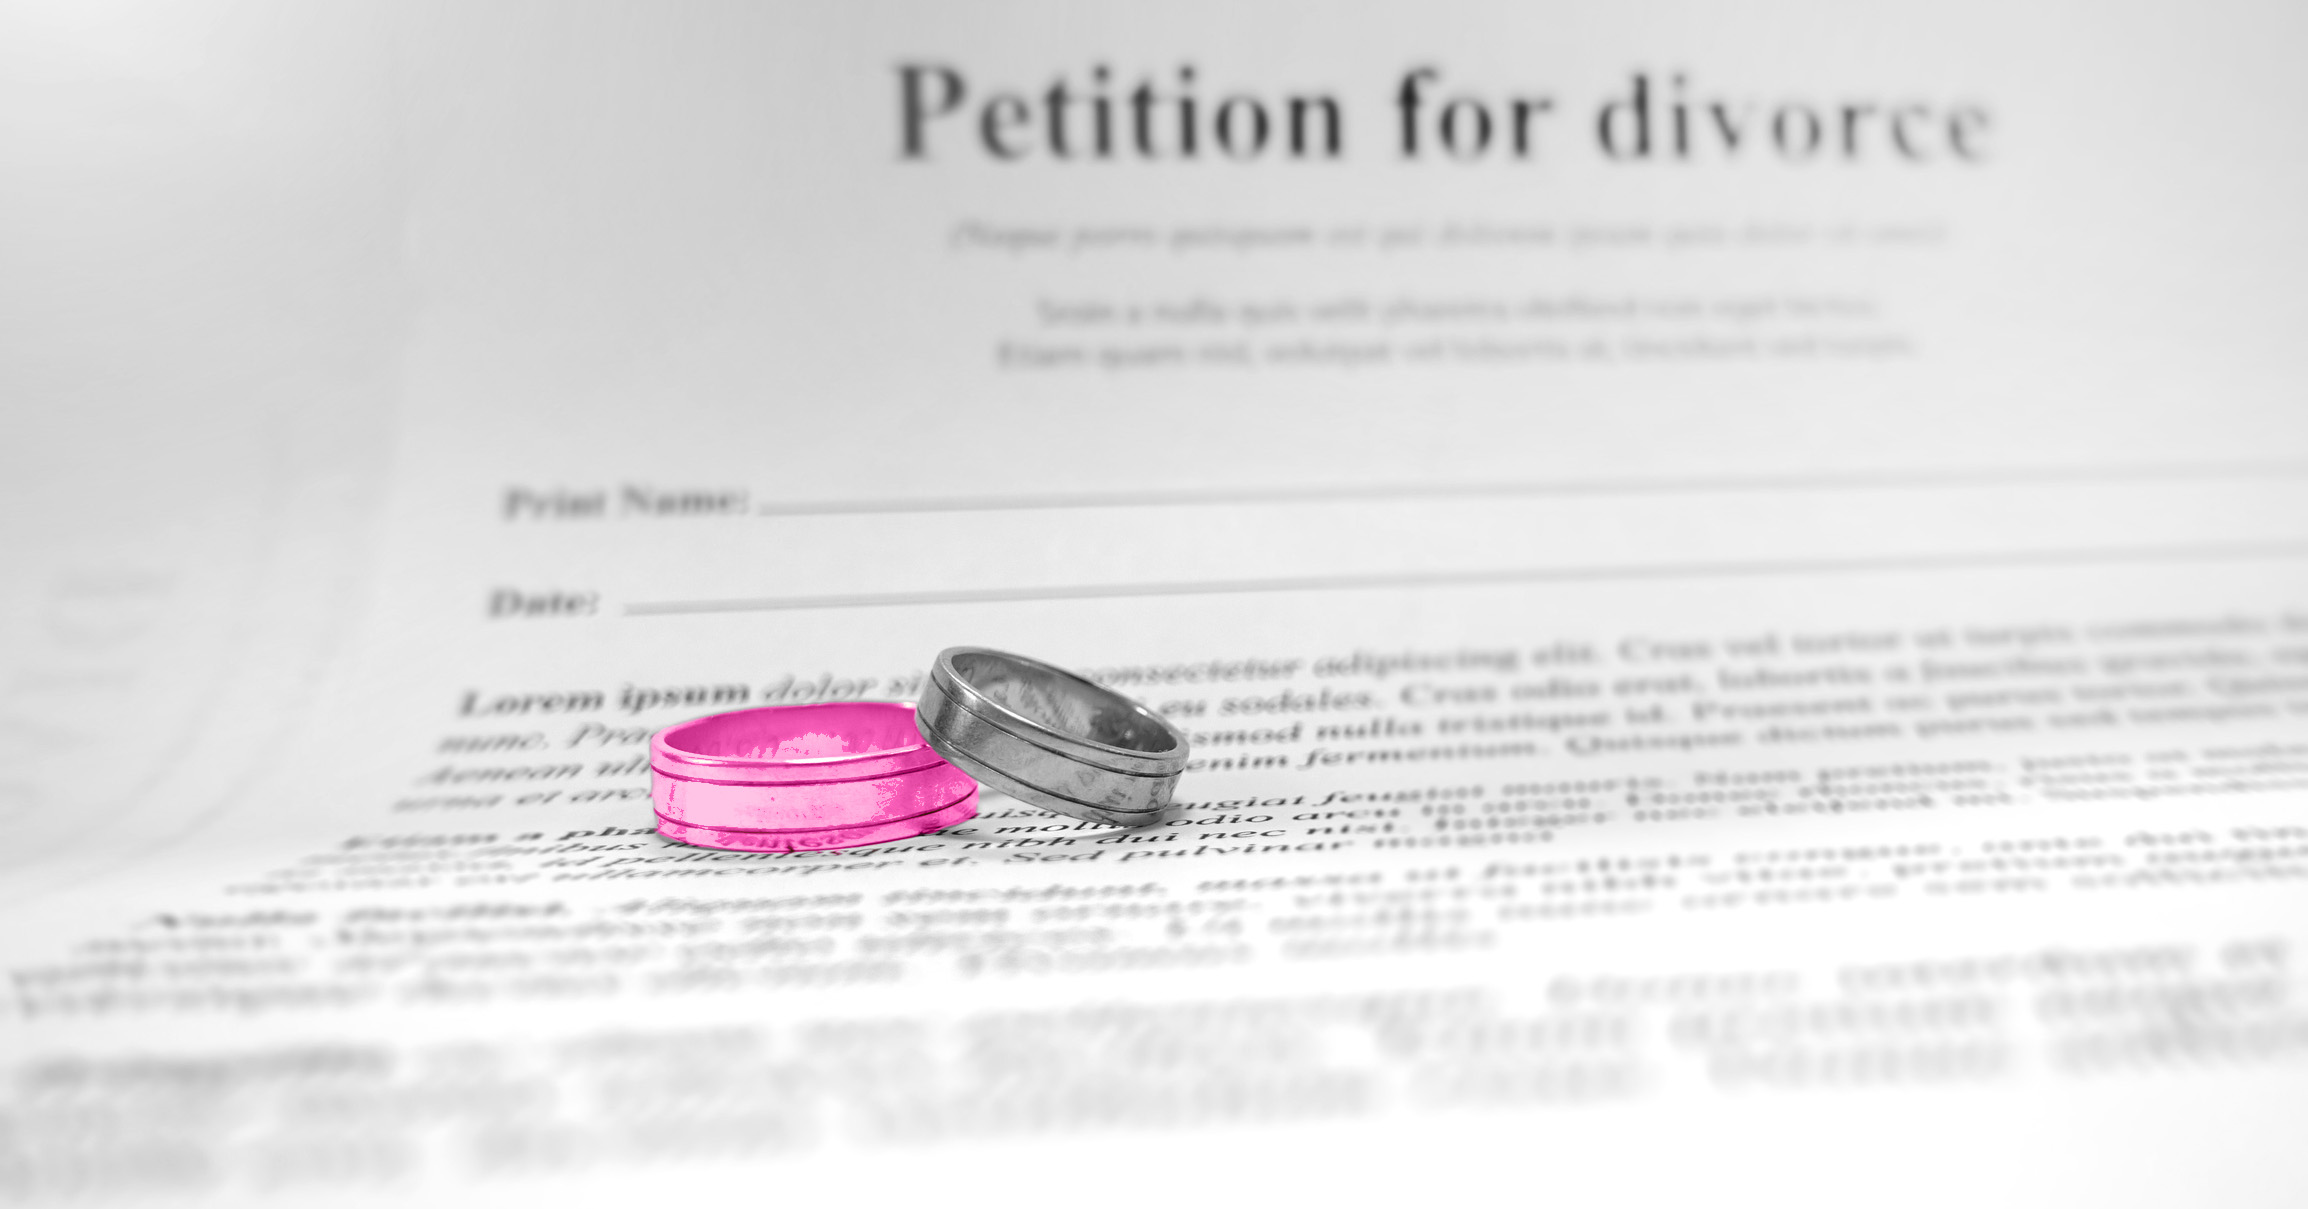 No Fault Divorce is finally here! Image